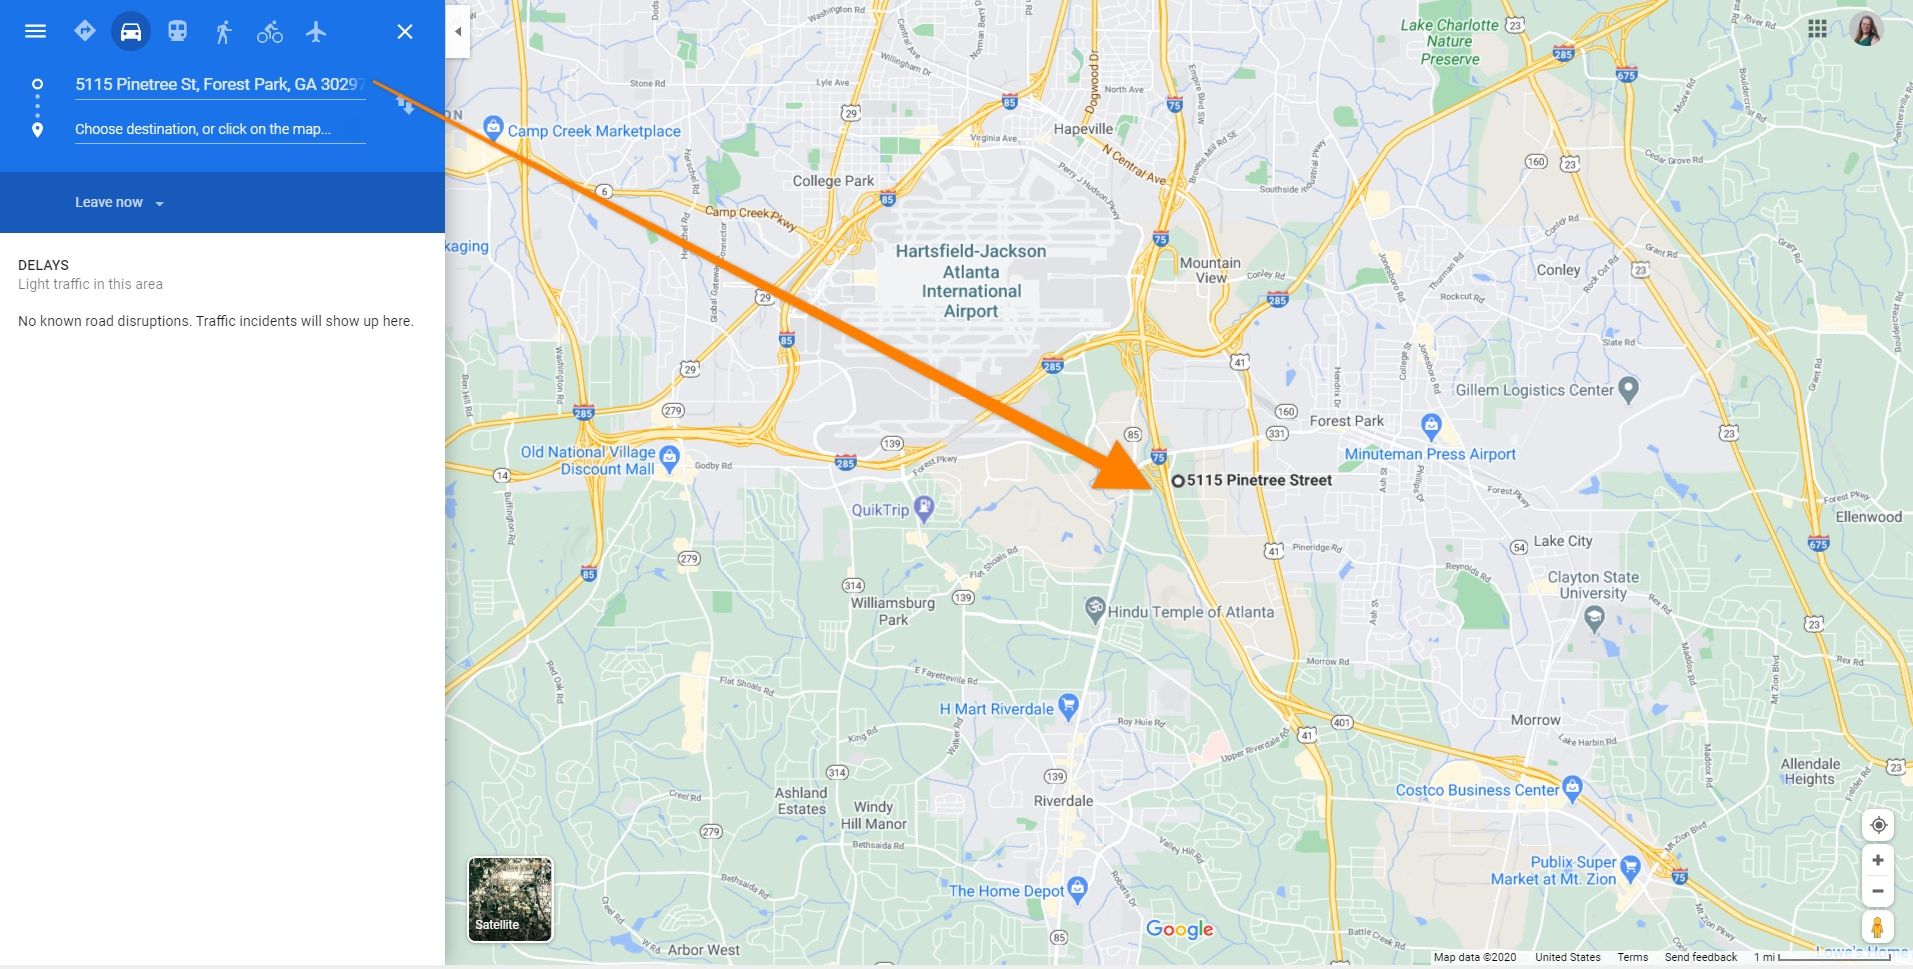 An image of a Google Map for the Atlanta, GA region with an arrow pointing from the address entered into the directions panel to the map pin for that selected starting point